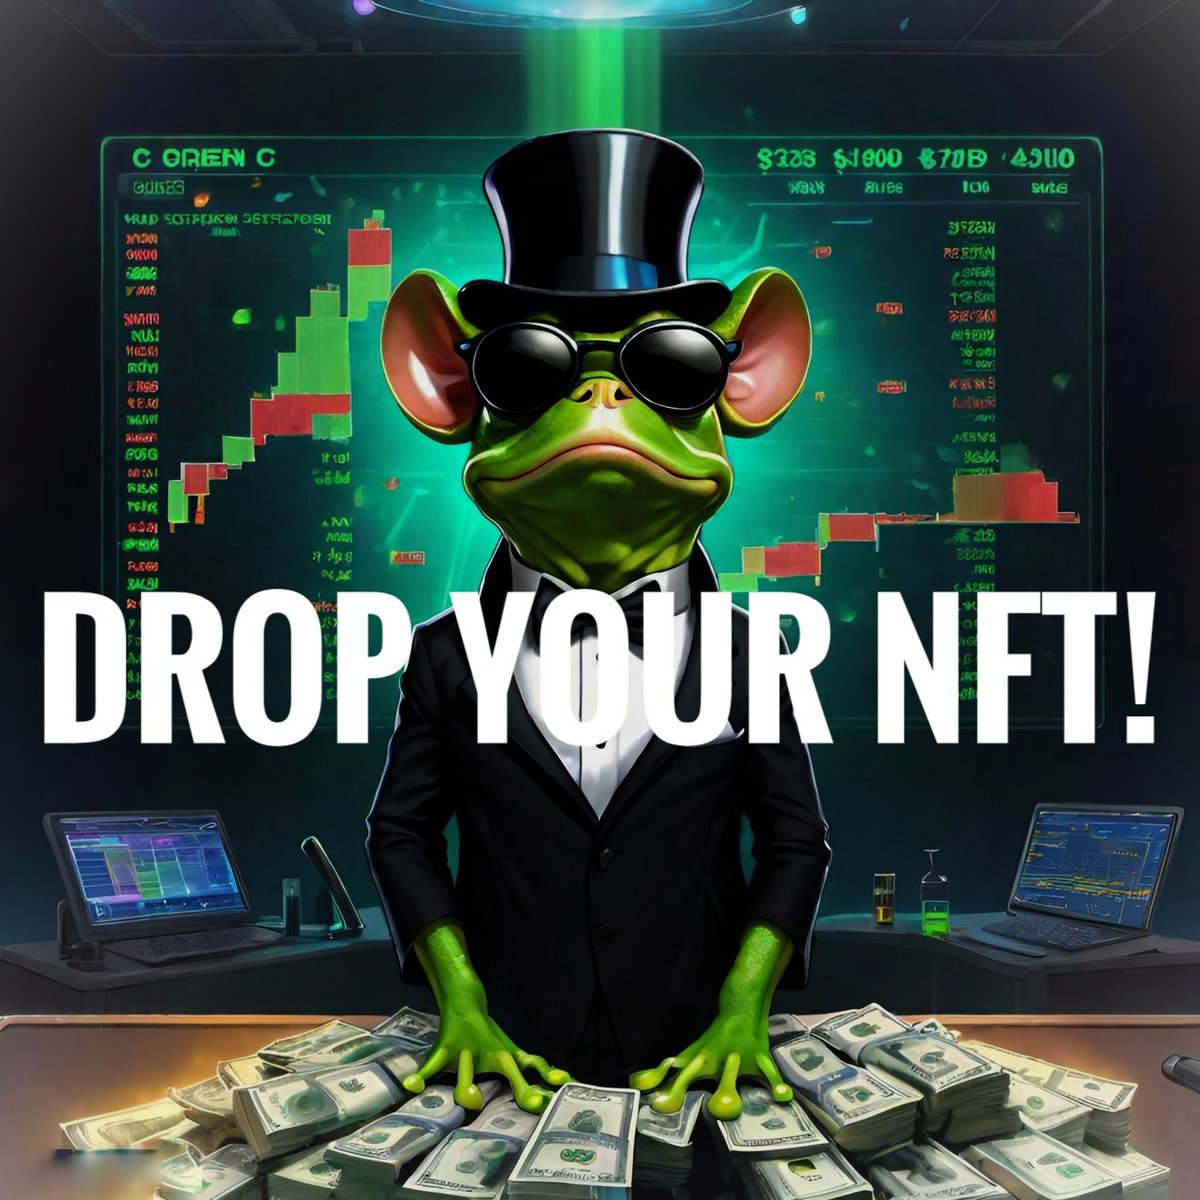 I would like to buy a nice NFT!  I can not find.  Can you show me?
❤️DROP YOUR NFT! ❤️
❤️FOLLOW-RETWEET❤️
#nft #nftart #bestnft #collector #cryptocurrency #opensea #objk #nftartist #cryptoart #BILLI
#NFTCommunity
#NFTs #nftcollector #Cripto #airdrop #bitcoin #ethereum #bnb